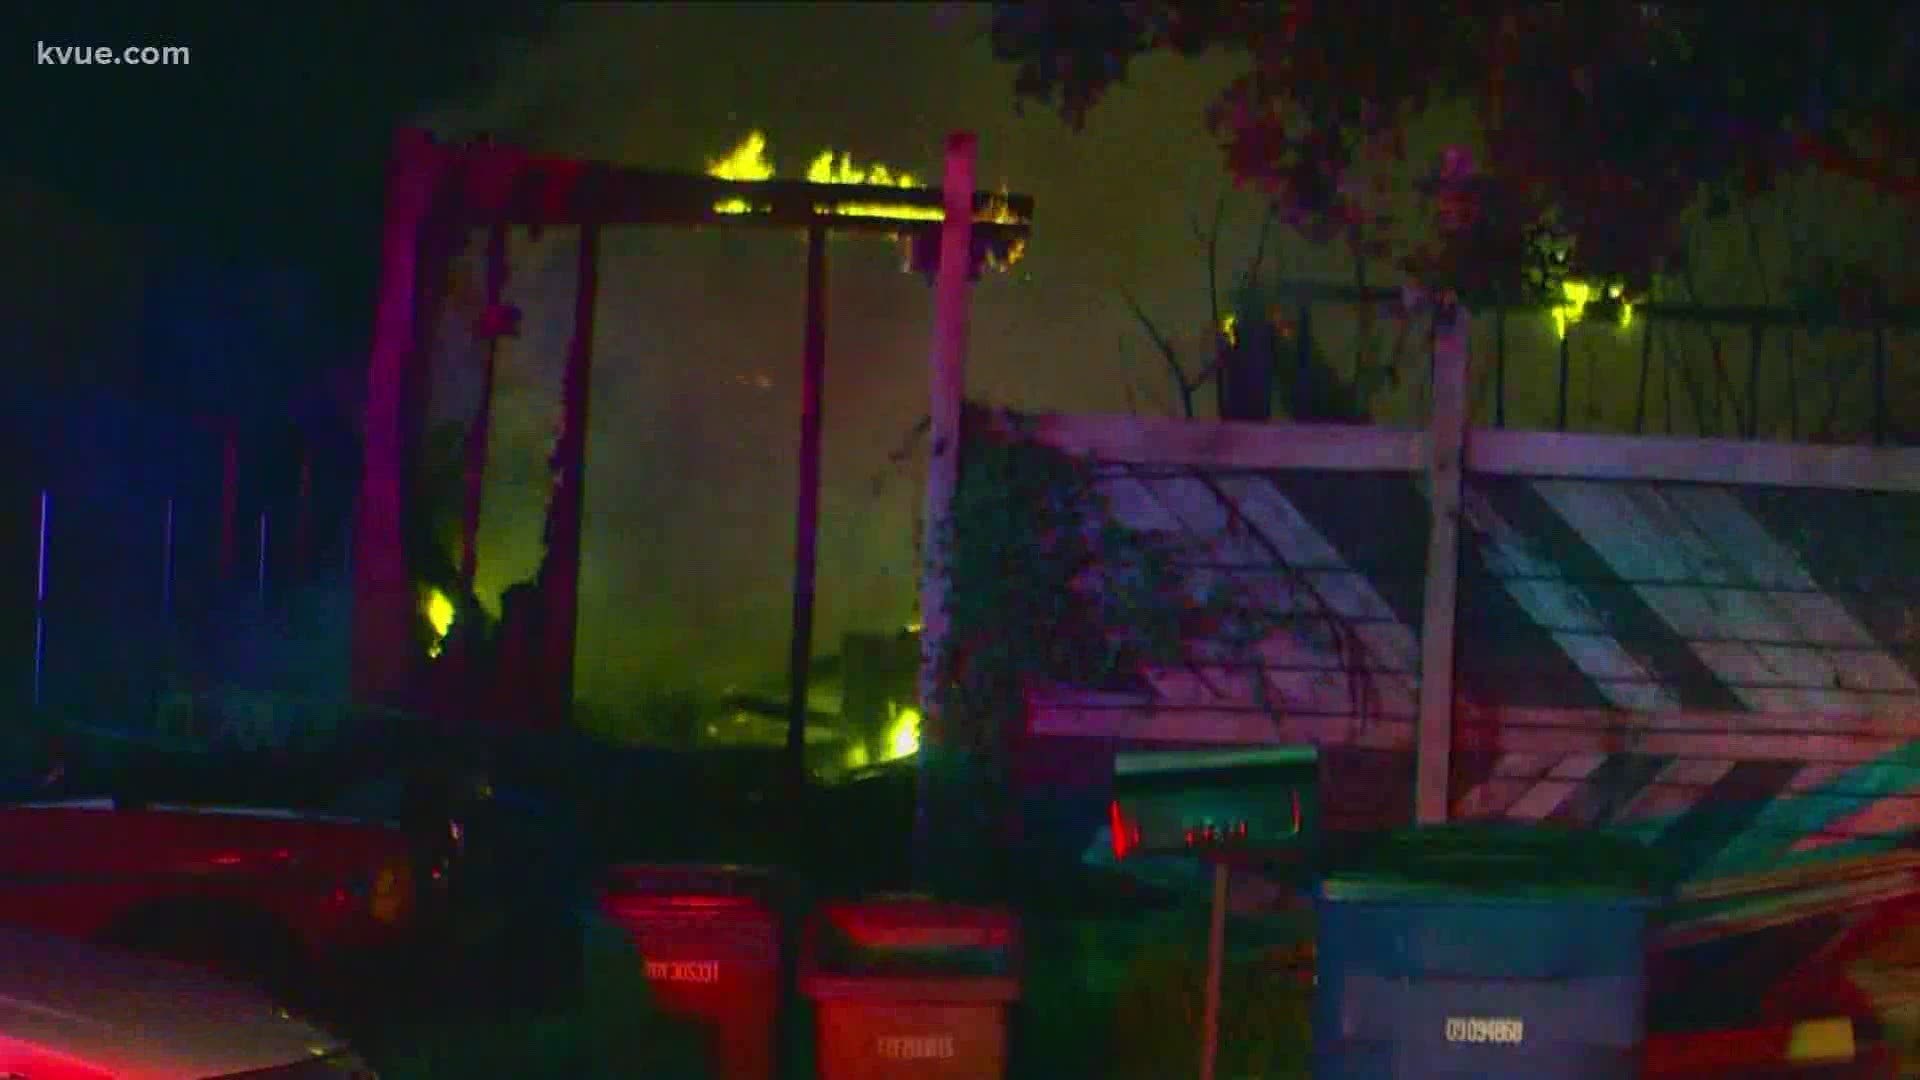 At least two separate fires caused by fireworks left several people displaced.